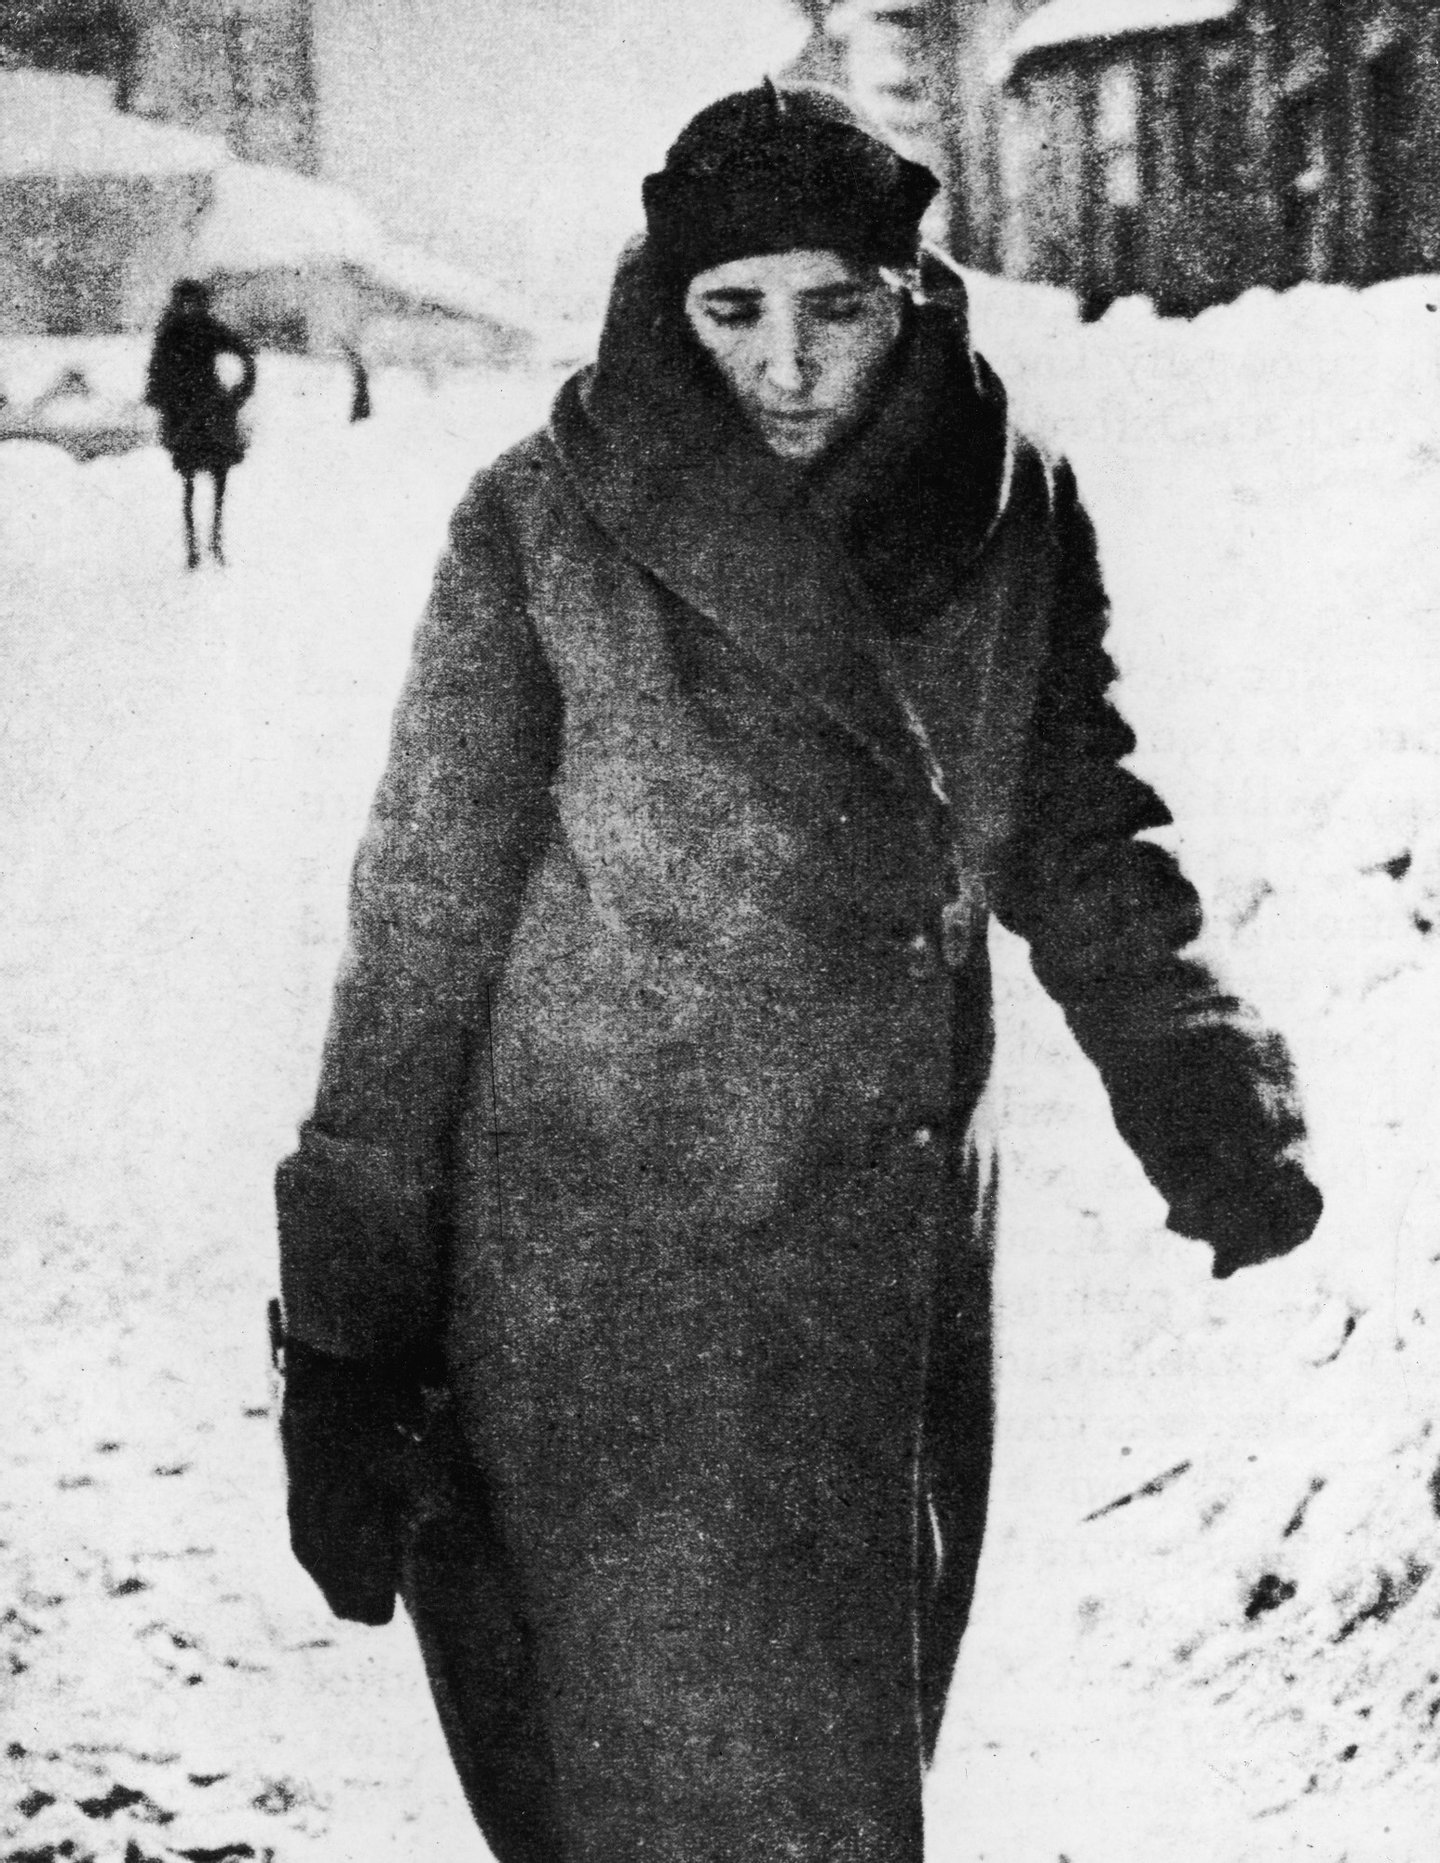 circa 1925: Nadezhda Alliluyeva-Stalin (1901 - 1932), the second wife of Joseph Stalin and mother of his children Vassily and Svetlana. They married in 1919 and she killed herself on November 8th, 1932. (Photo by Hulton Archive/Getty Images)